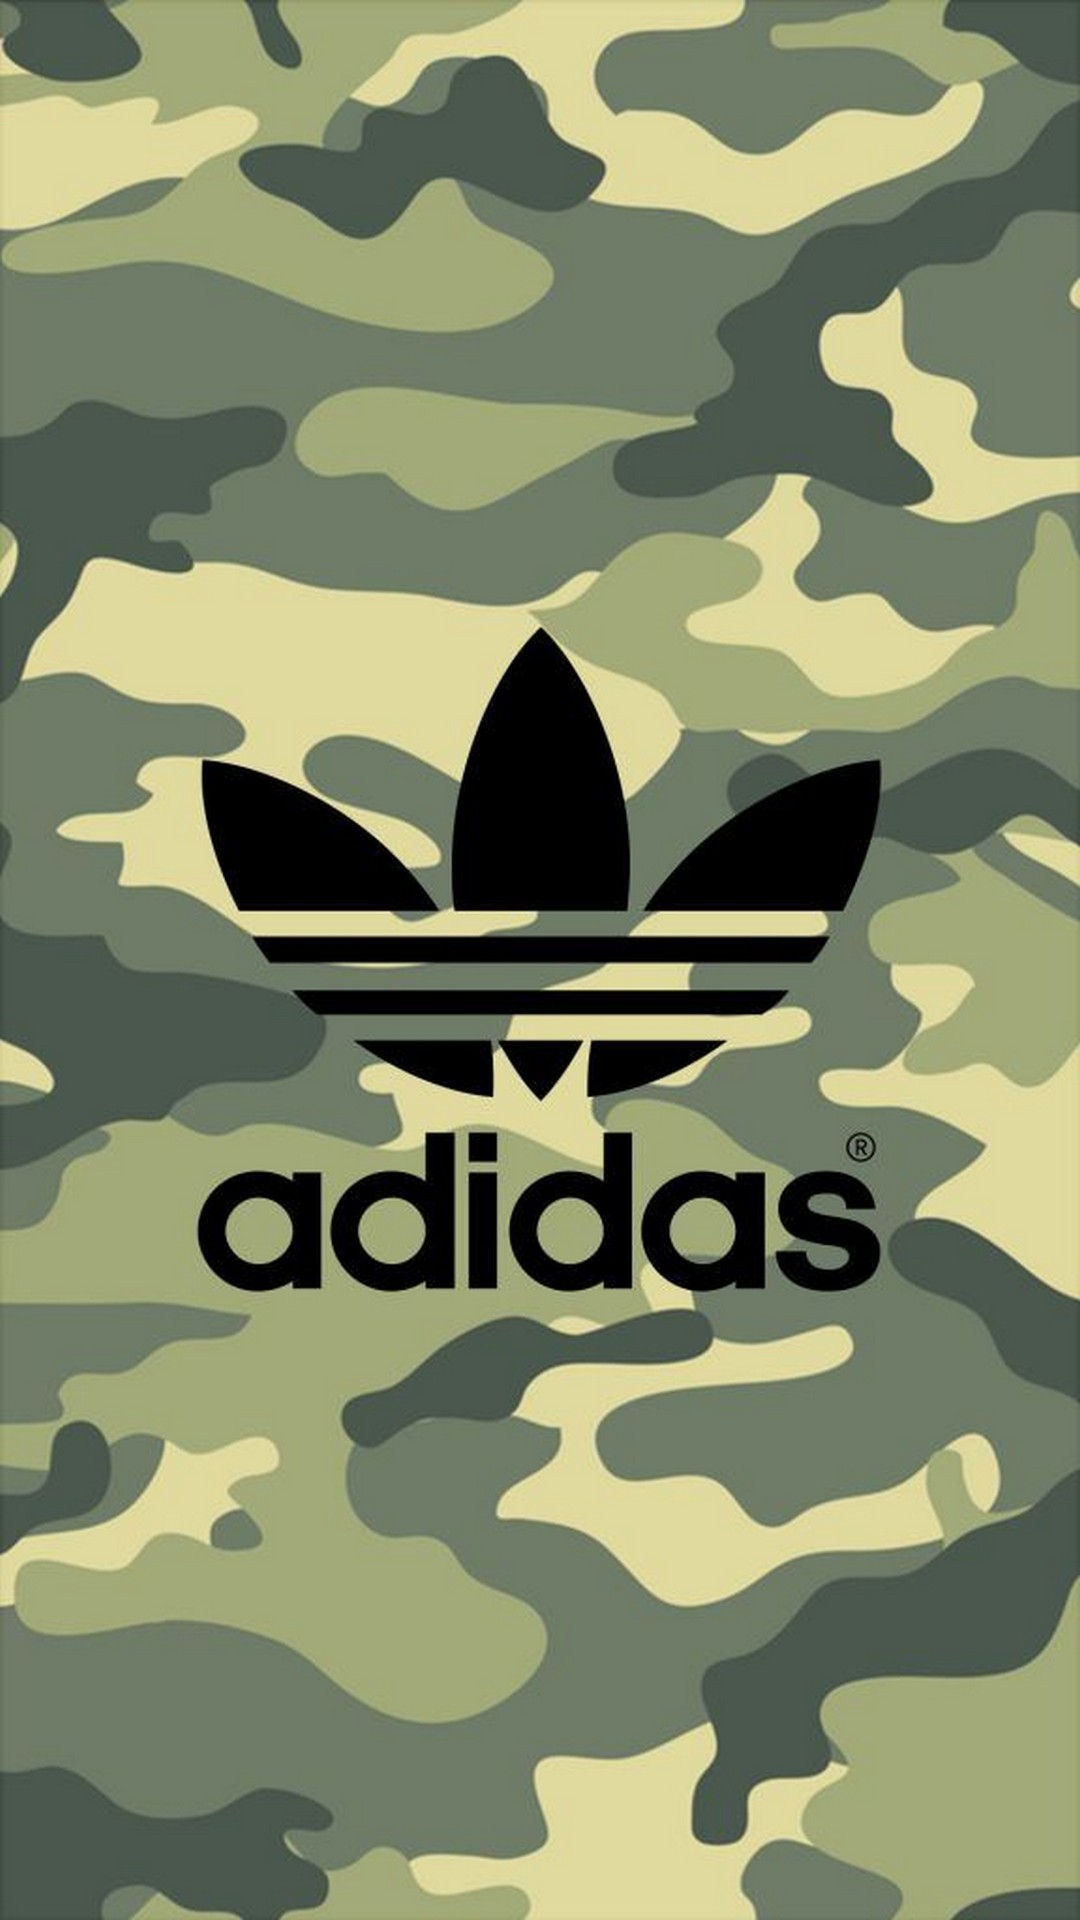 Wallpapers Phone Adidas With high-resolution 1080X1920 pixel. You can use this wallpaper for your Android backgrounds, Tablet, Samsung Screensavers, Mobile Phone Lock Screen and another Smartphones device